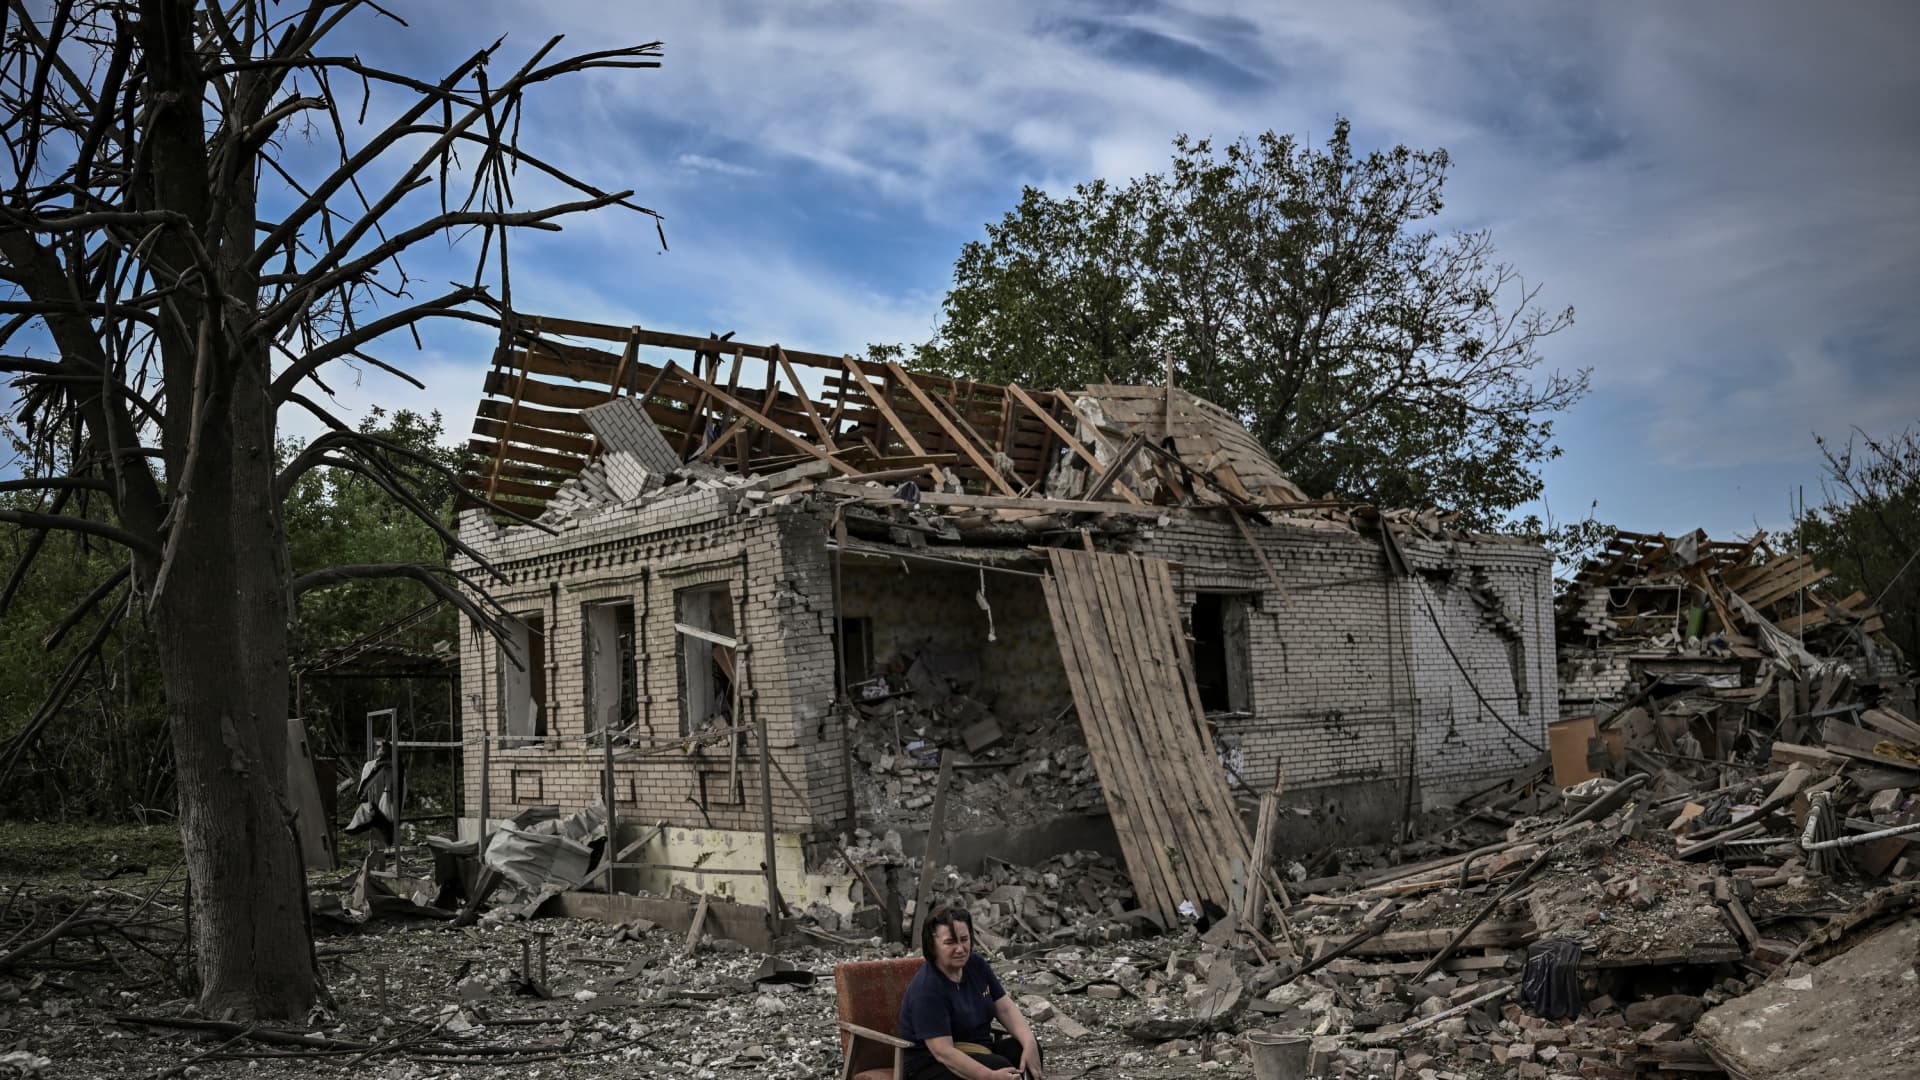 A woman sits on a chair in front of a destroyed house after a missile strike, which killed an old woman, in the city of Druzhkivka (also written Druzhkovka) in the eastern Ukrainian region of Donbas on June 5, 2022.